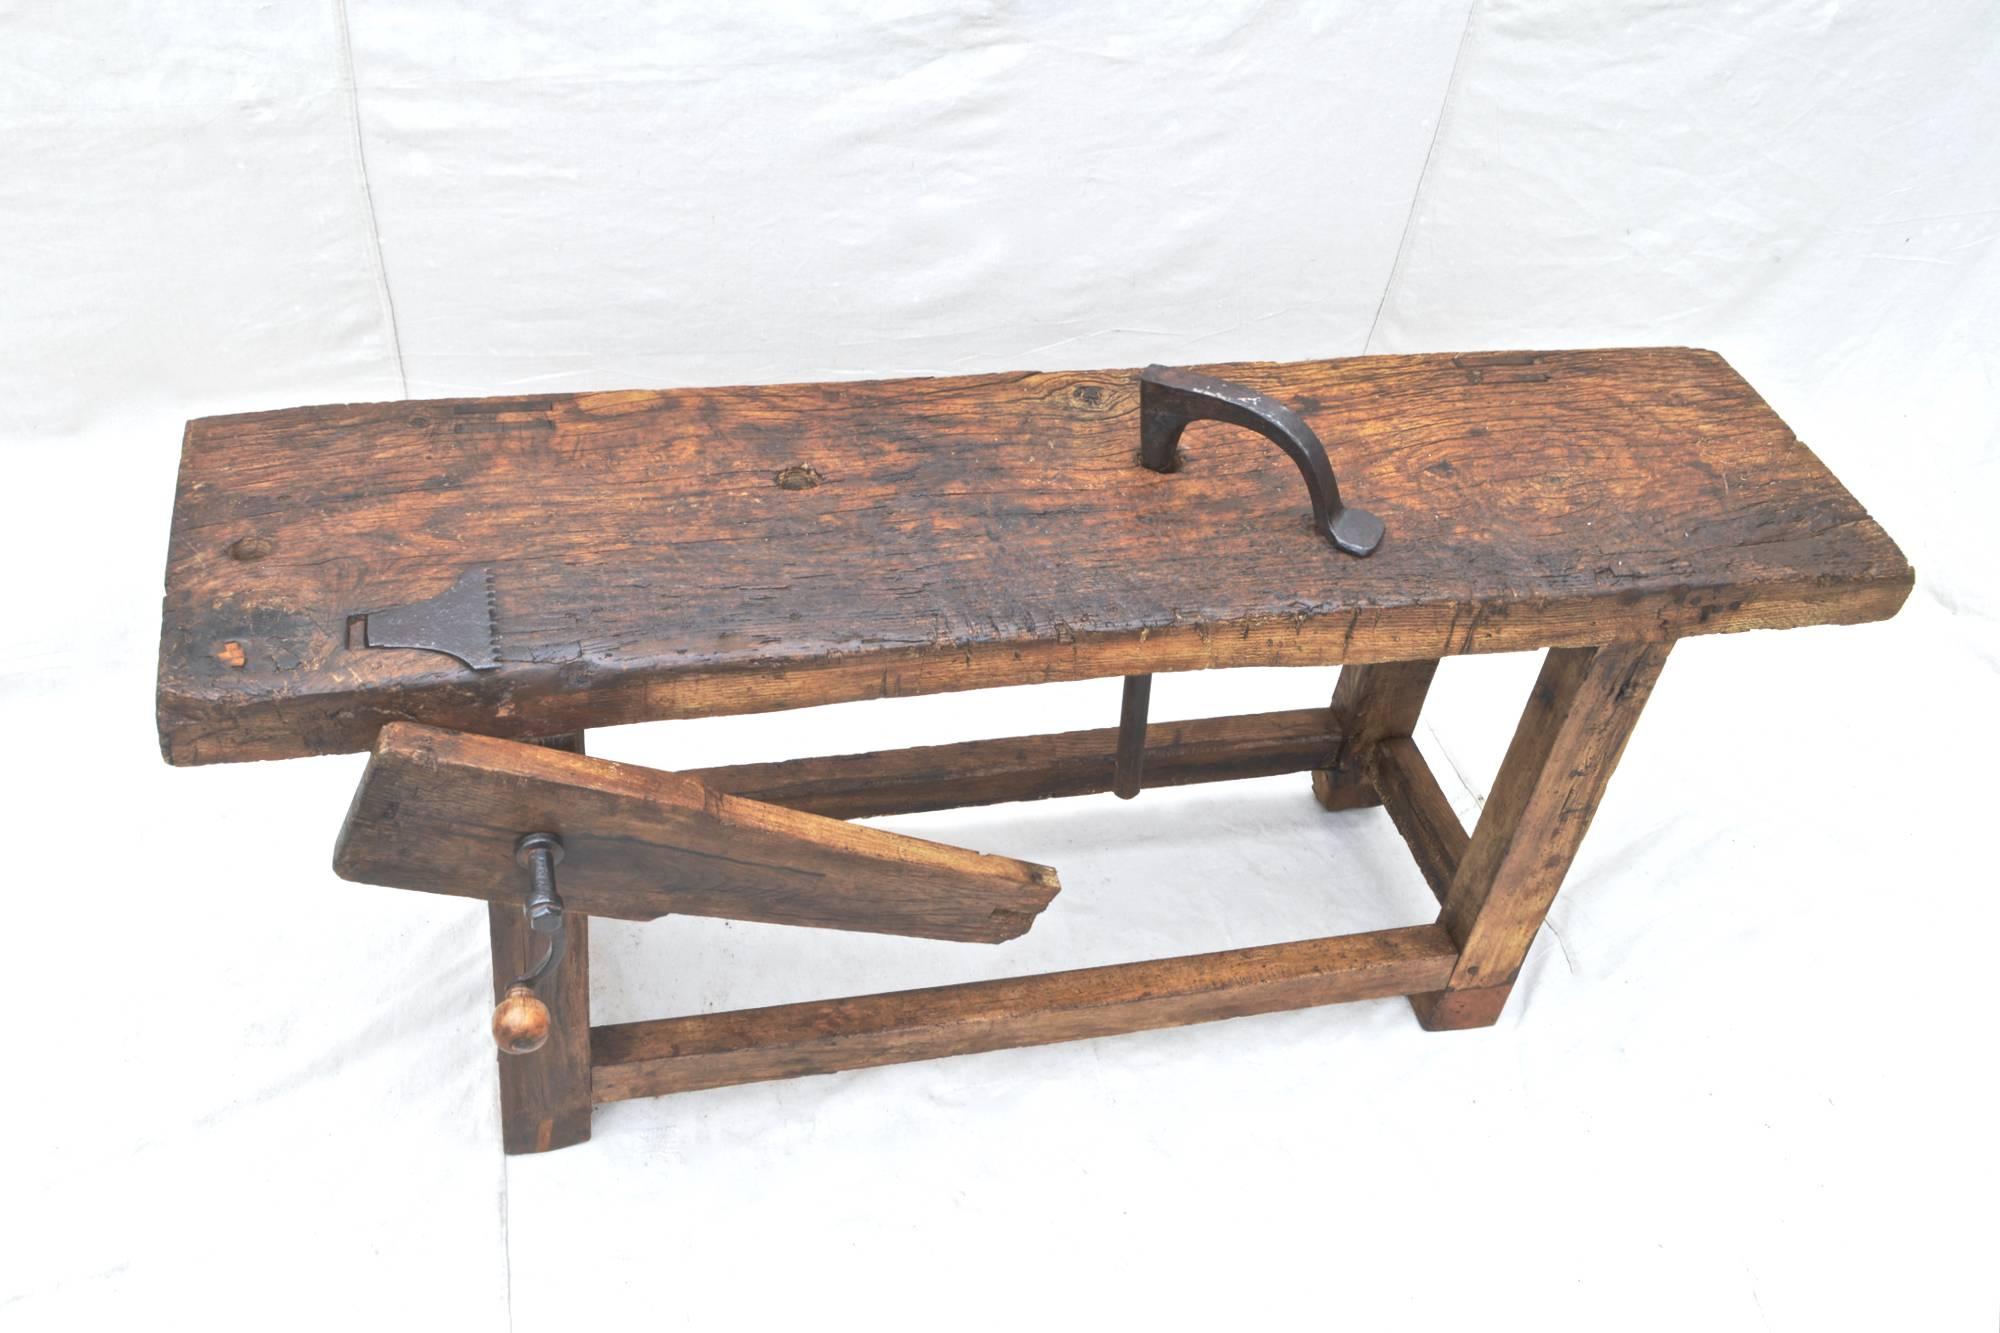 18th century workbench of elmwood. Mortised construction throughout gives this wonderful piece not only strength, but a simple beauty that is difficult to duplicate. Use as a statement coffee table or console. All original and working